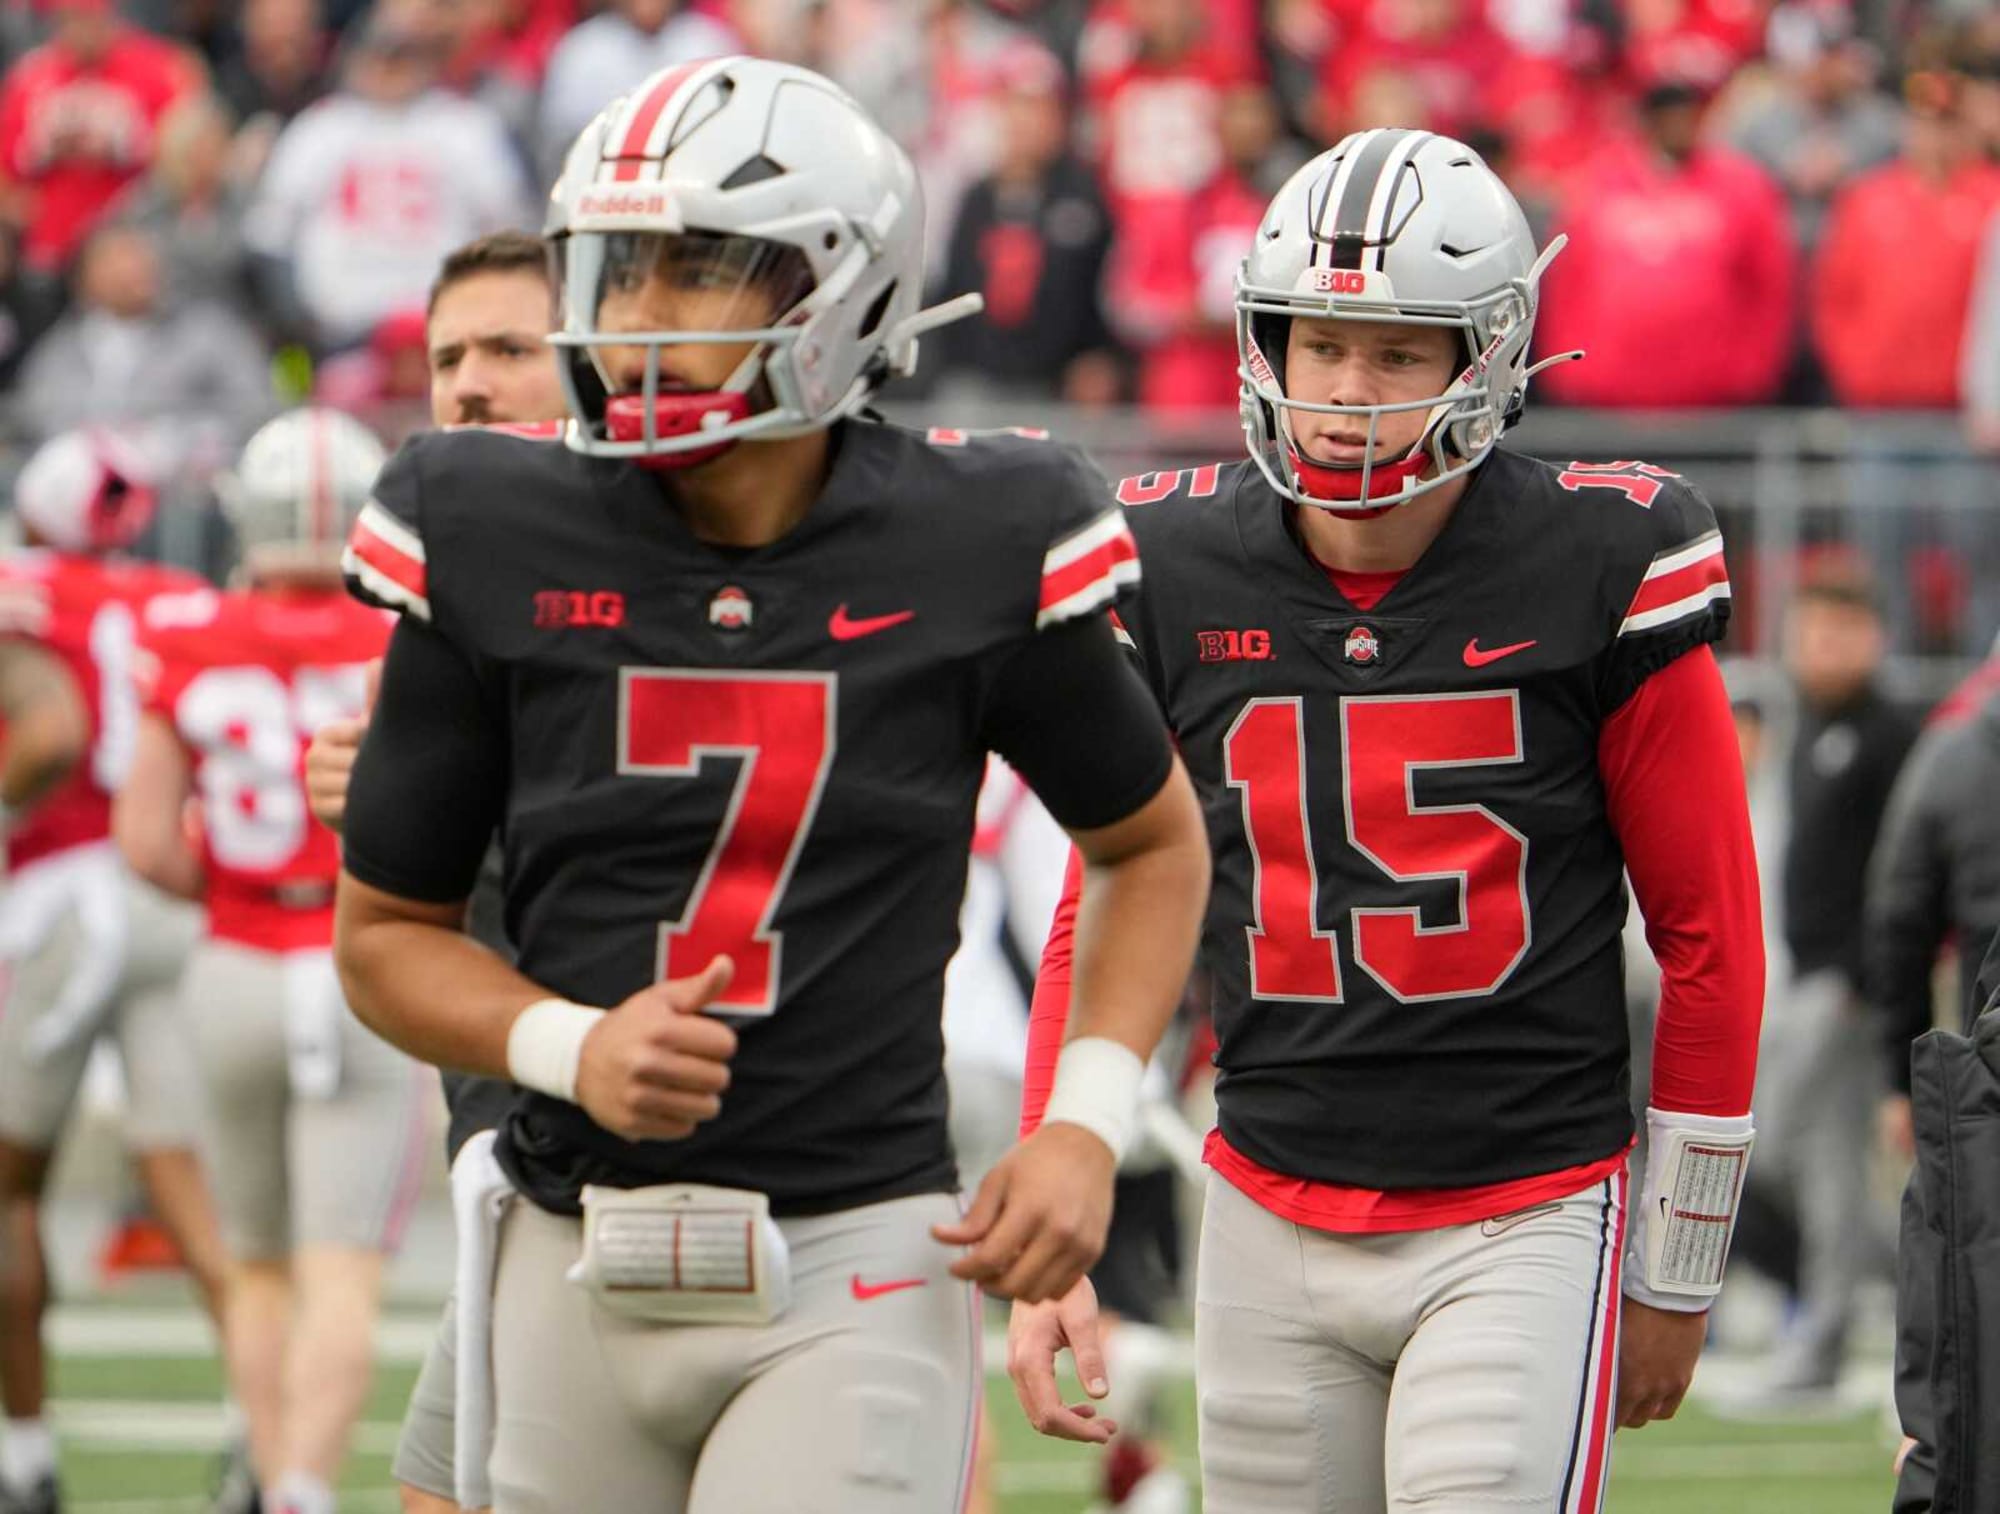 Ohio State Football: A new kind of pressure for C.J. Stroud